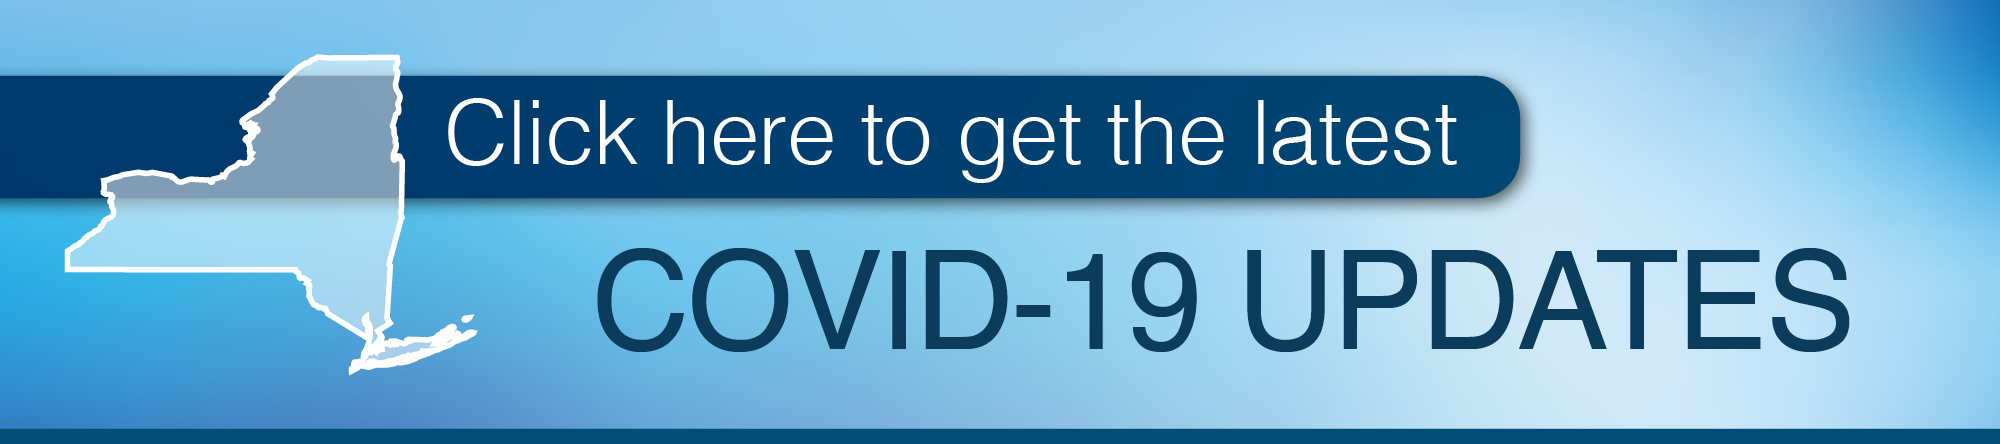 Get the latest on COVID-19